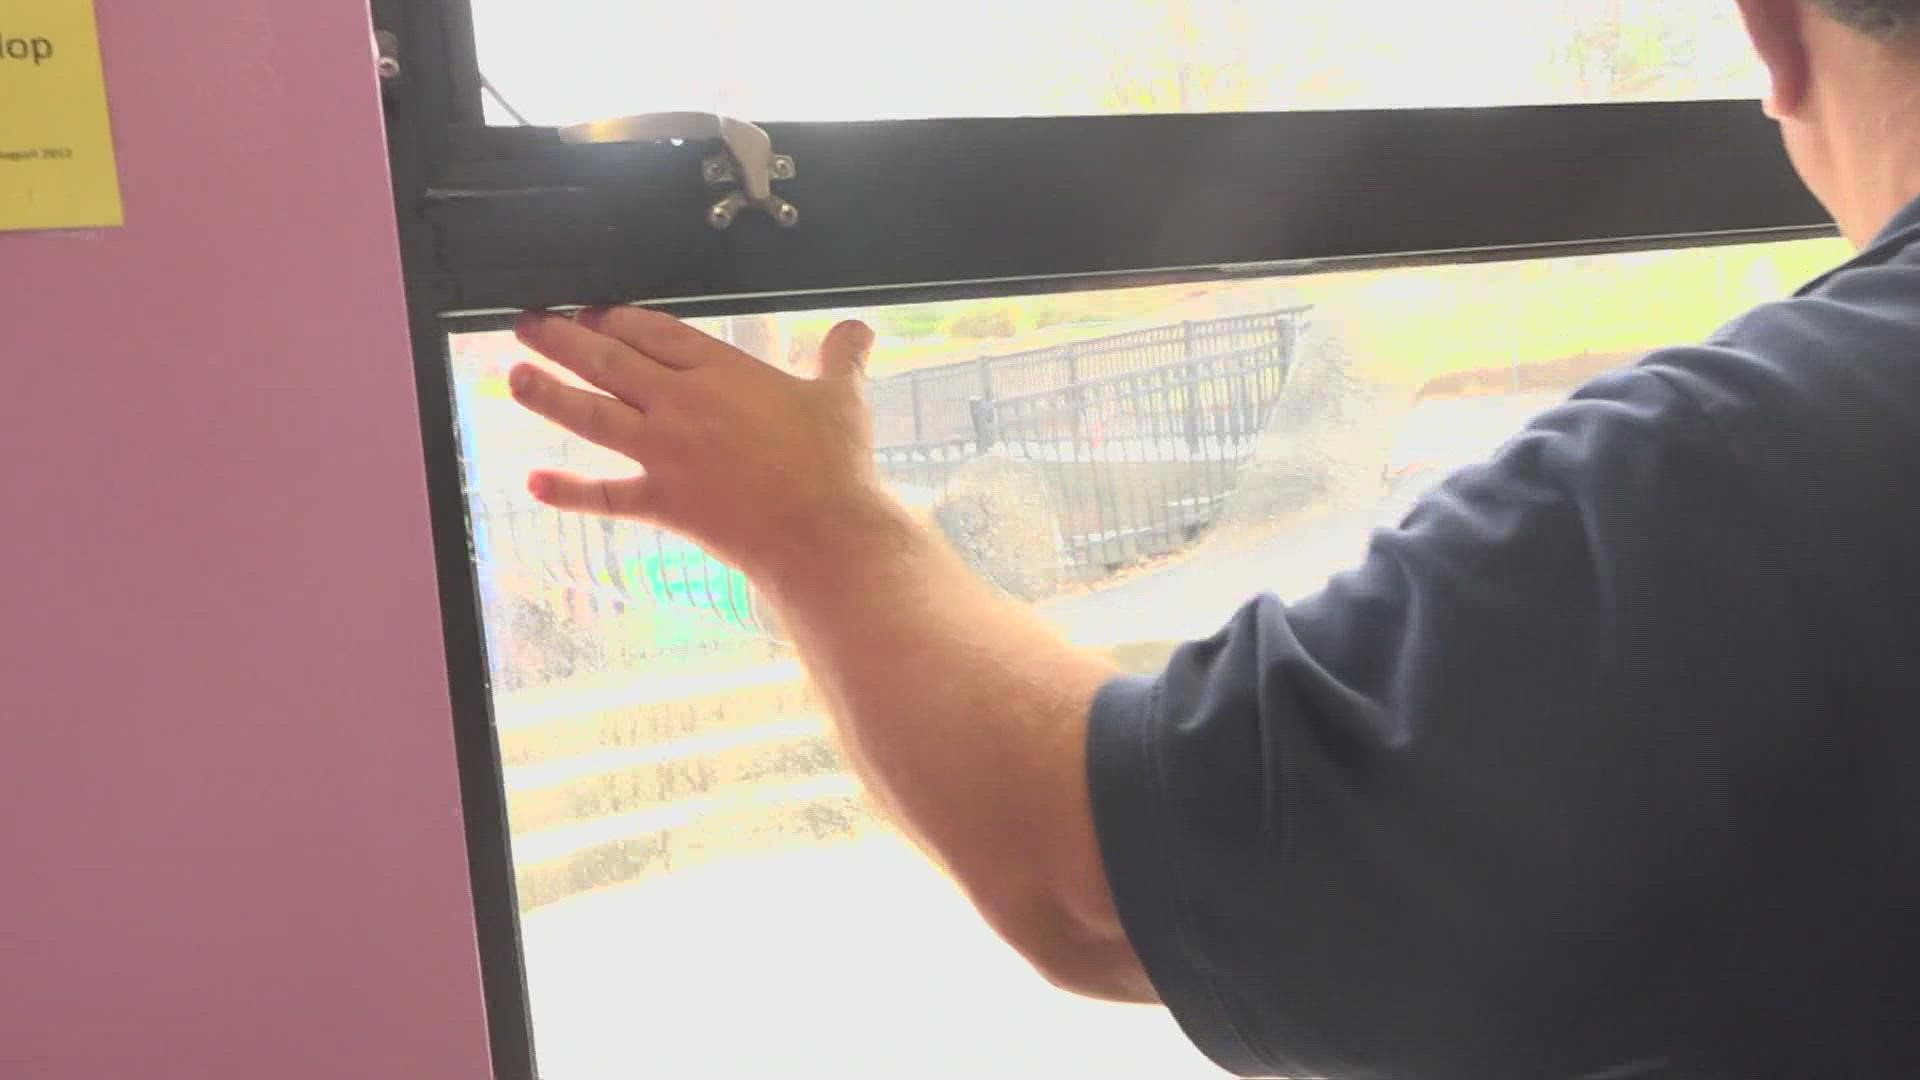 A Belleville school district is covering their windows with shatter-proof protective plastic film. This comes after the shooting at Central VPA High School.